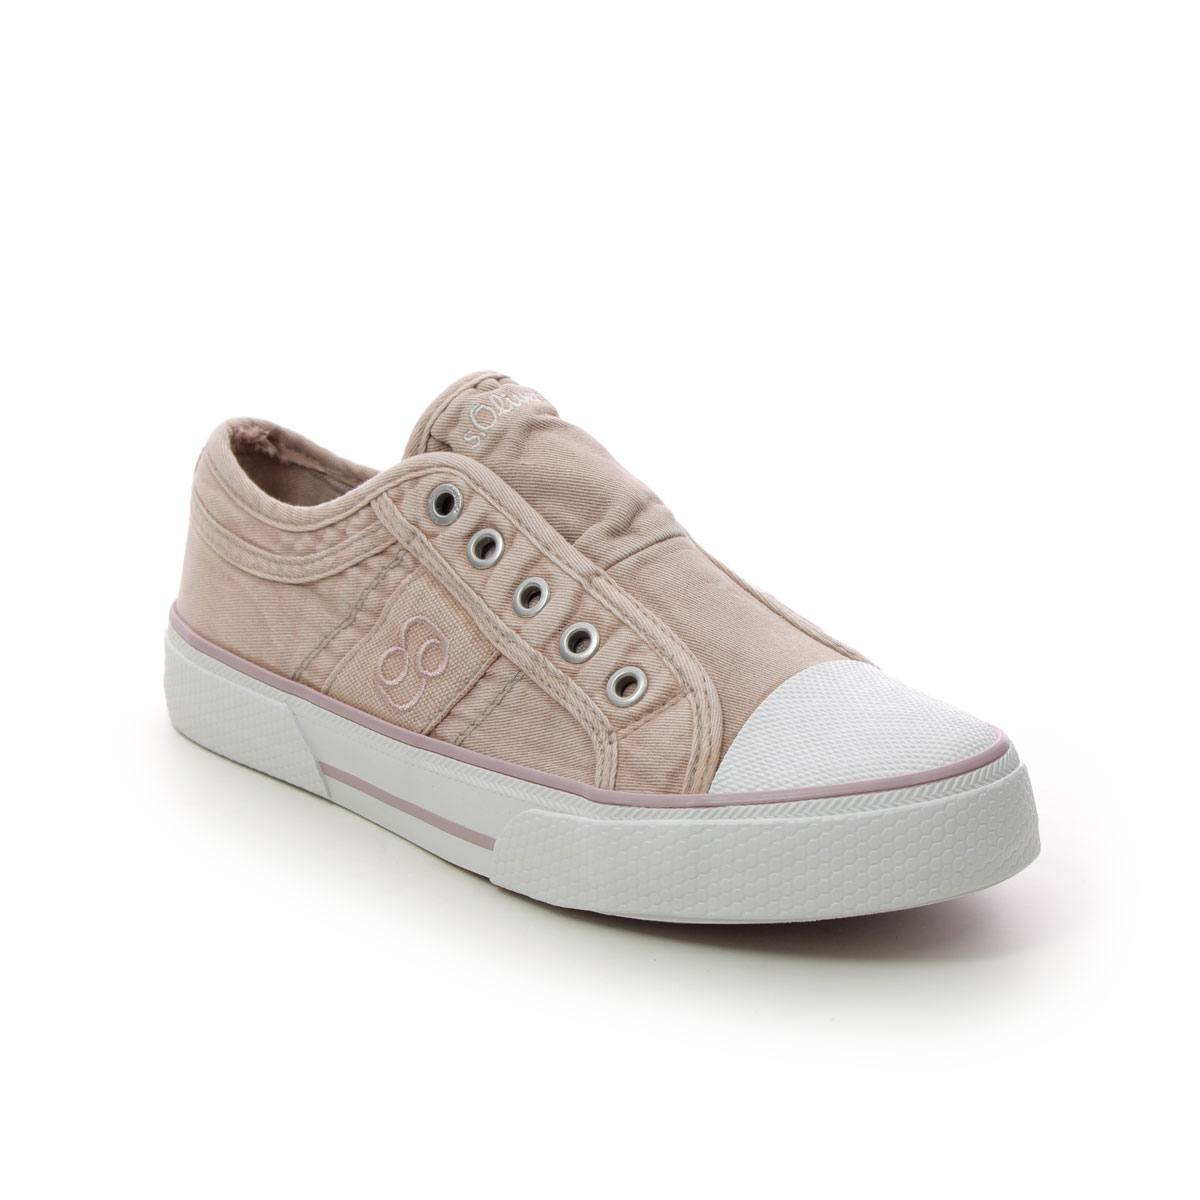 S Oliver Mustang 31 Rose 24635-30544 Womens pink trainers